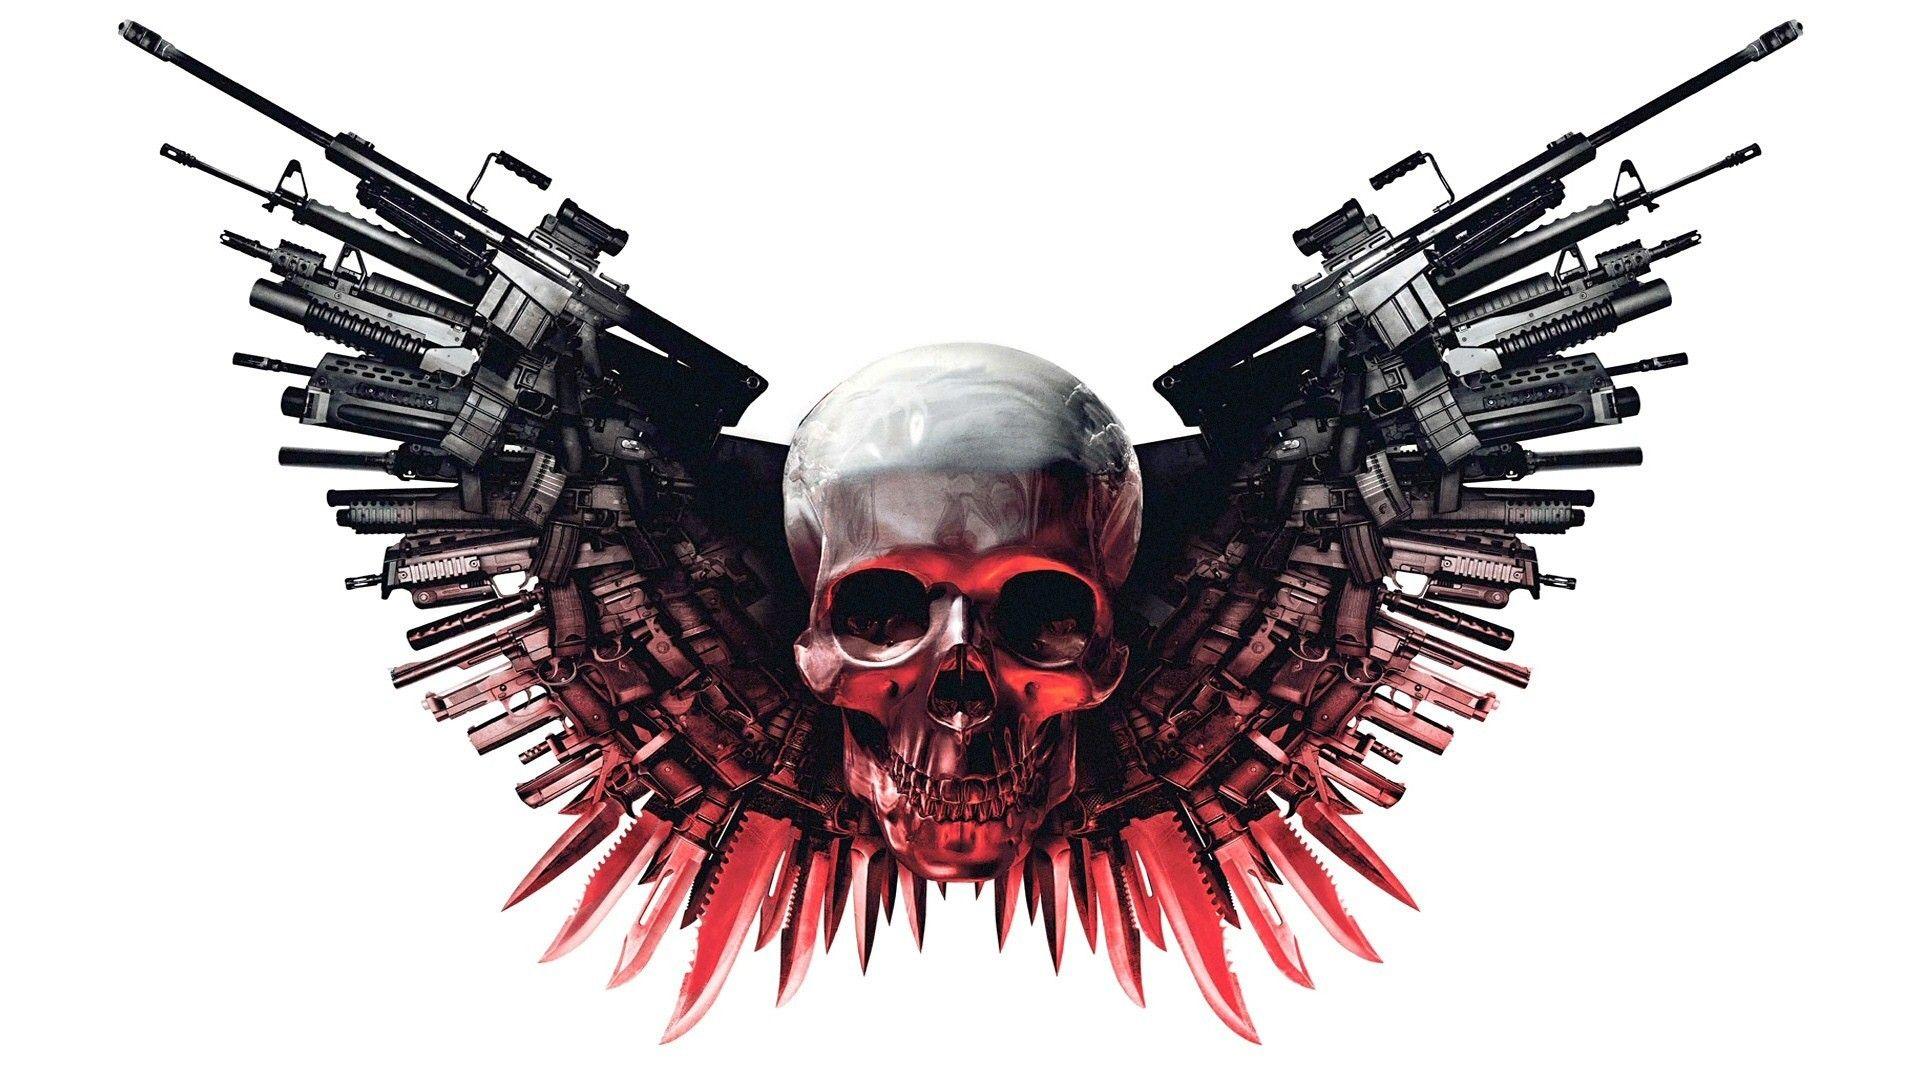 Wallpaper, illustration, gun, weapon, skull, The Expendables, wing